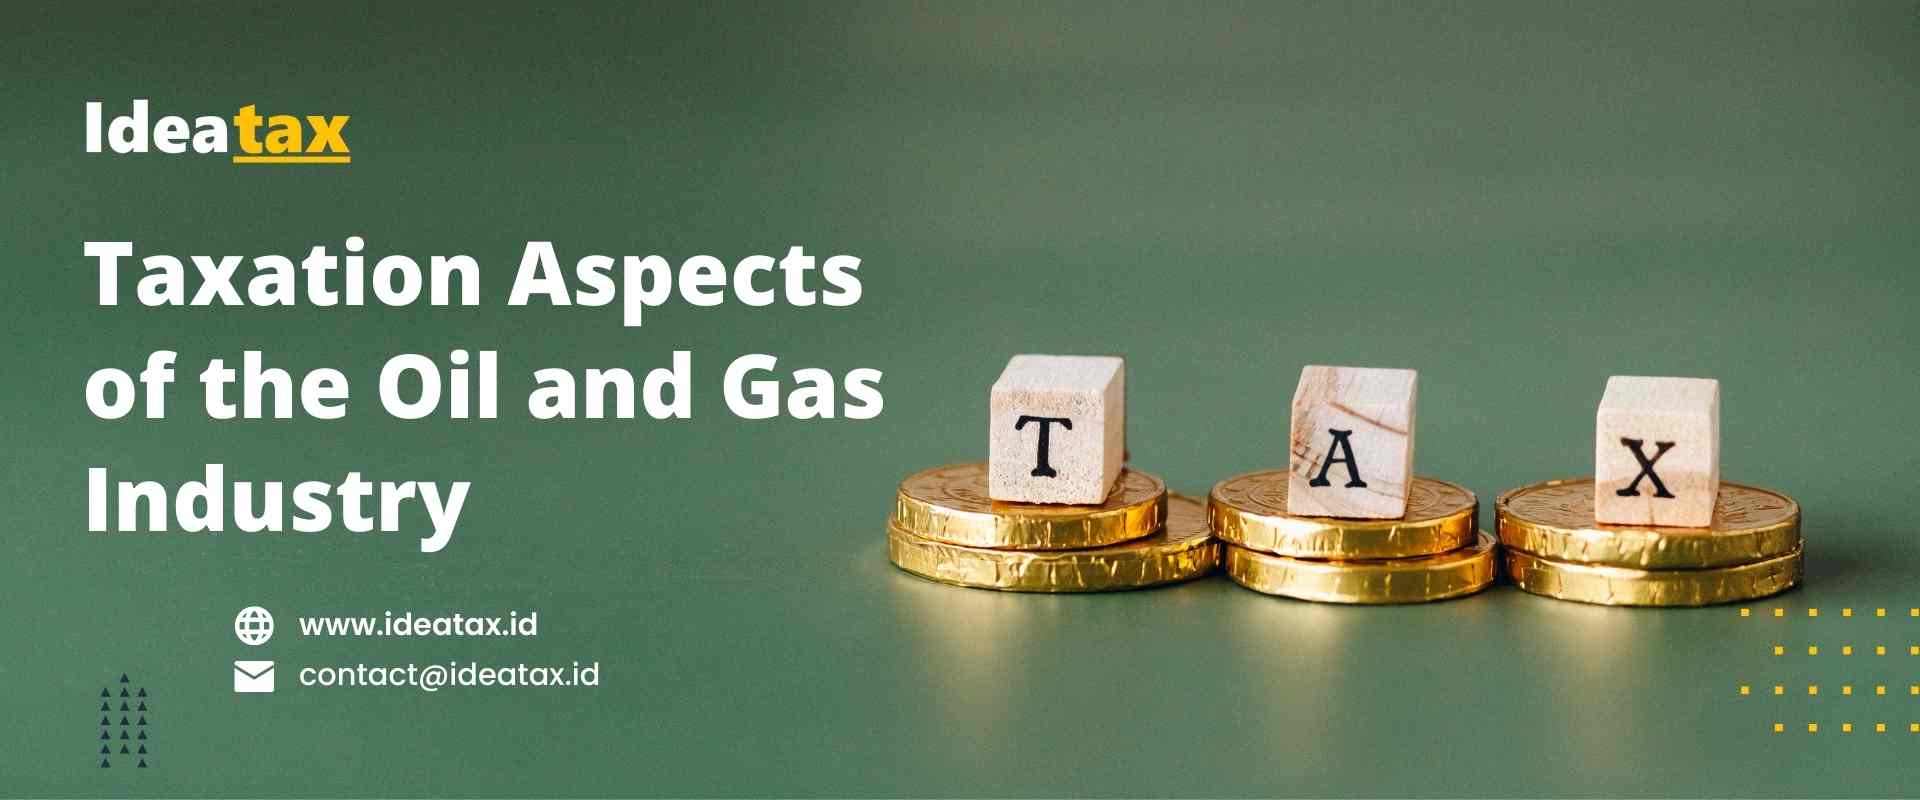 Taxation Aspects of the Oil and Gas Industry